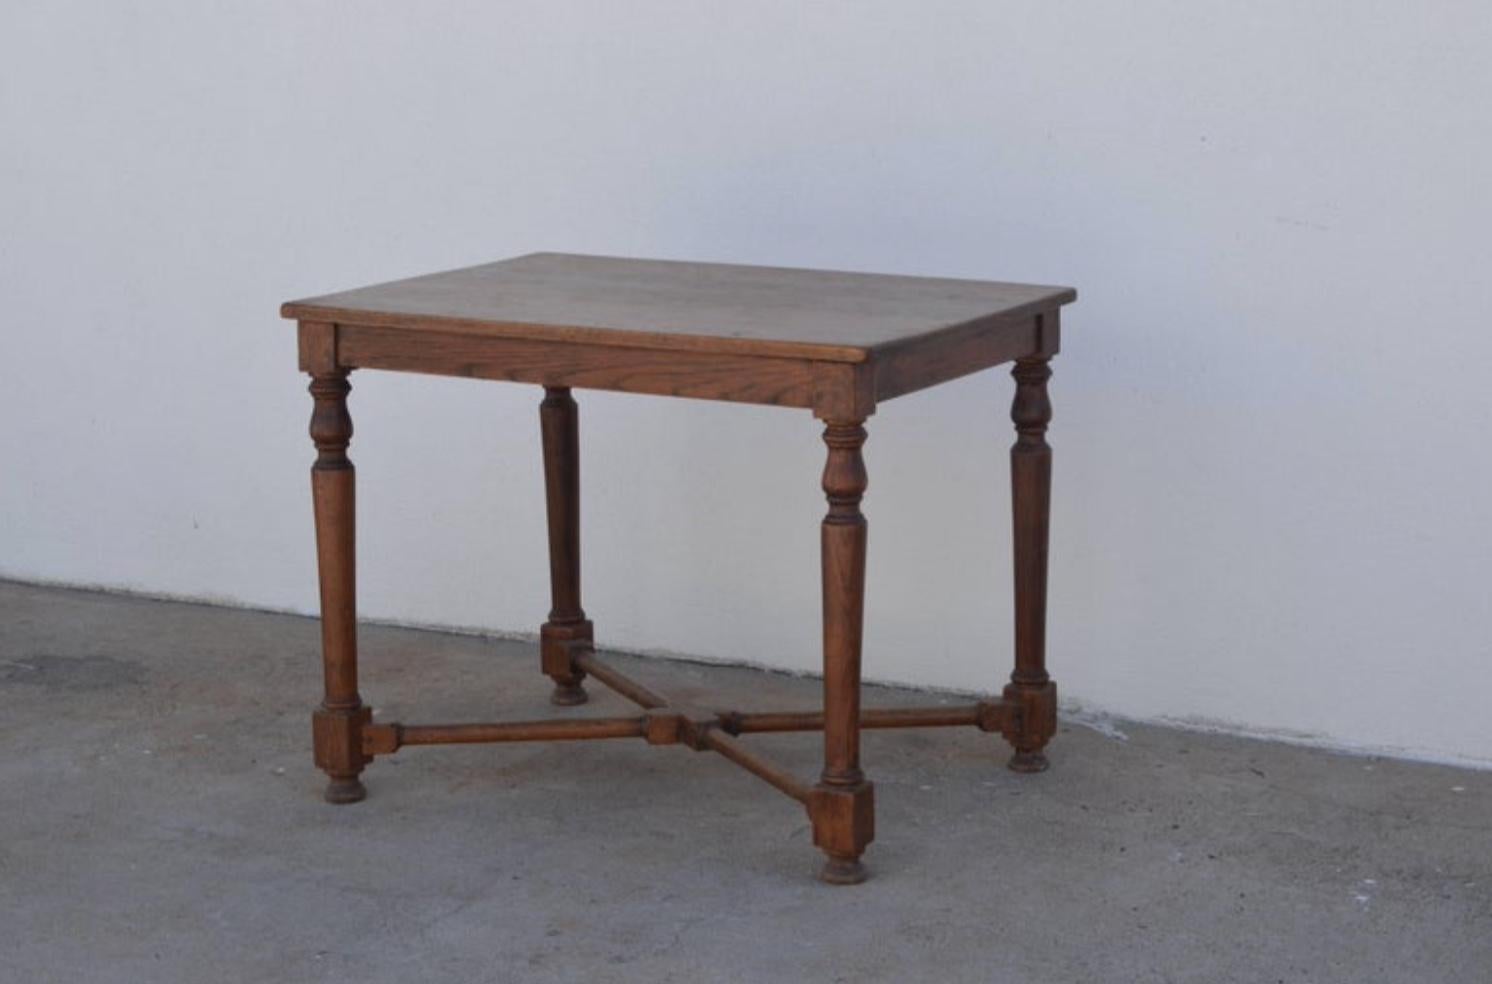 Elegant architectural French oak center or game table. Very sturdy. Great as a small desk or writing table as well.